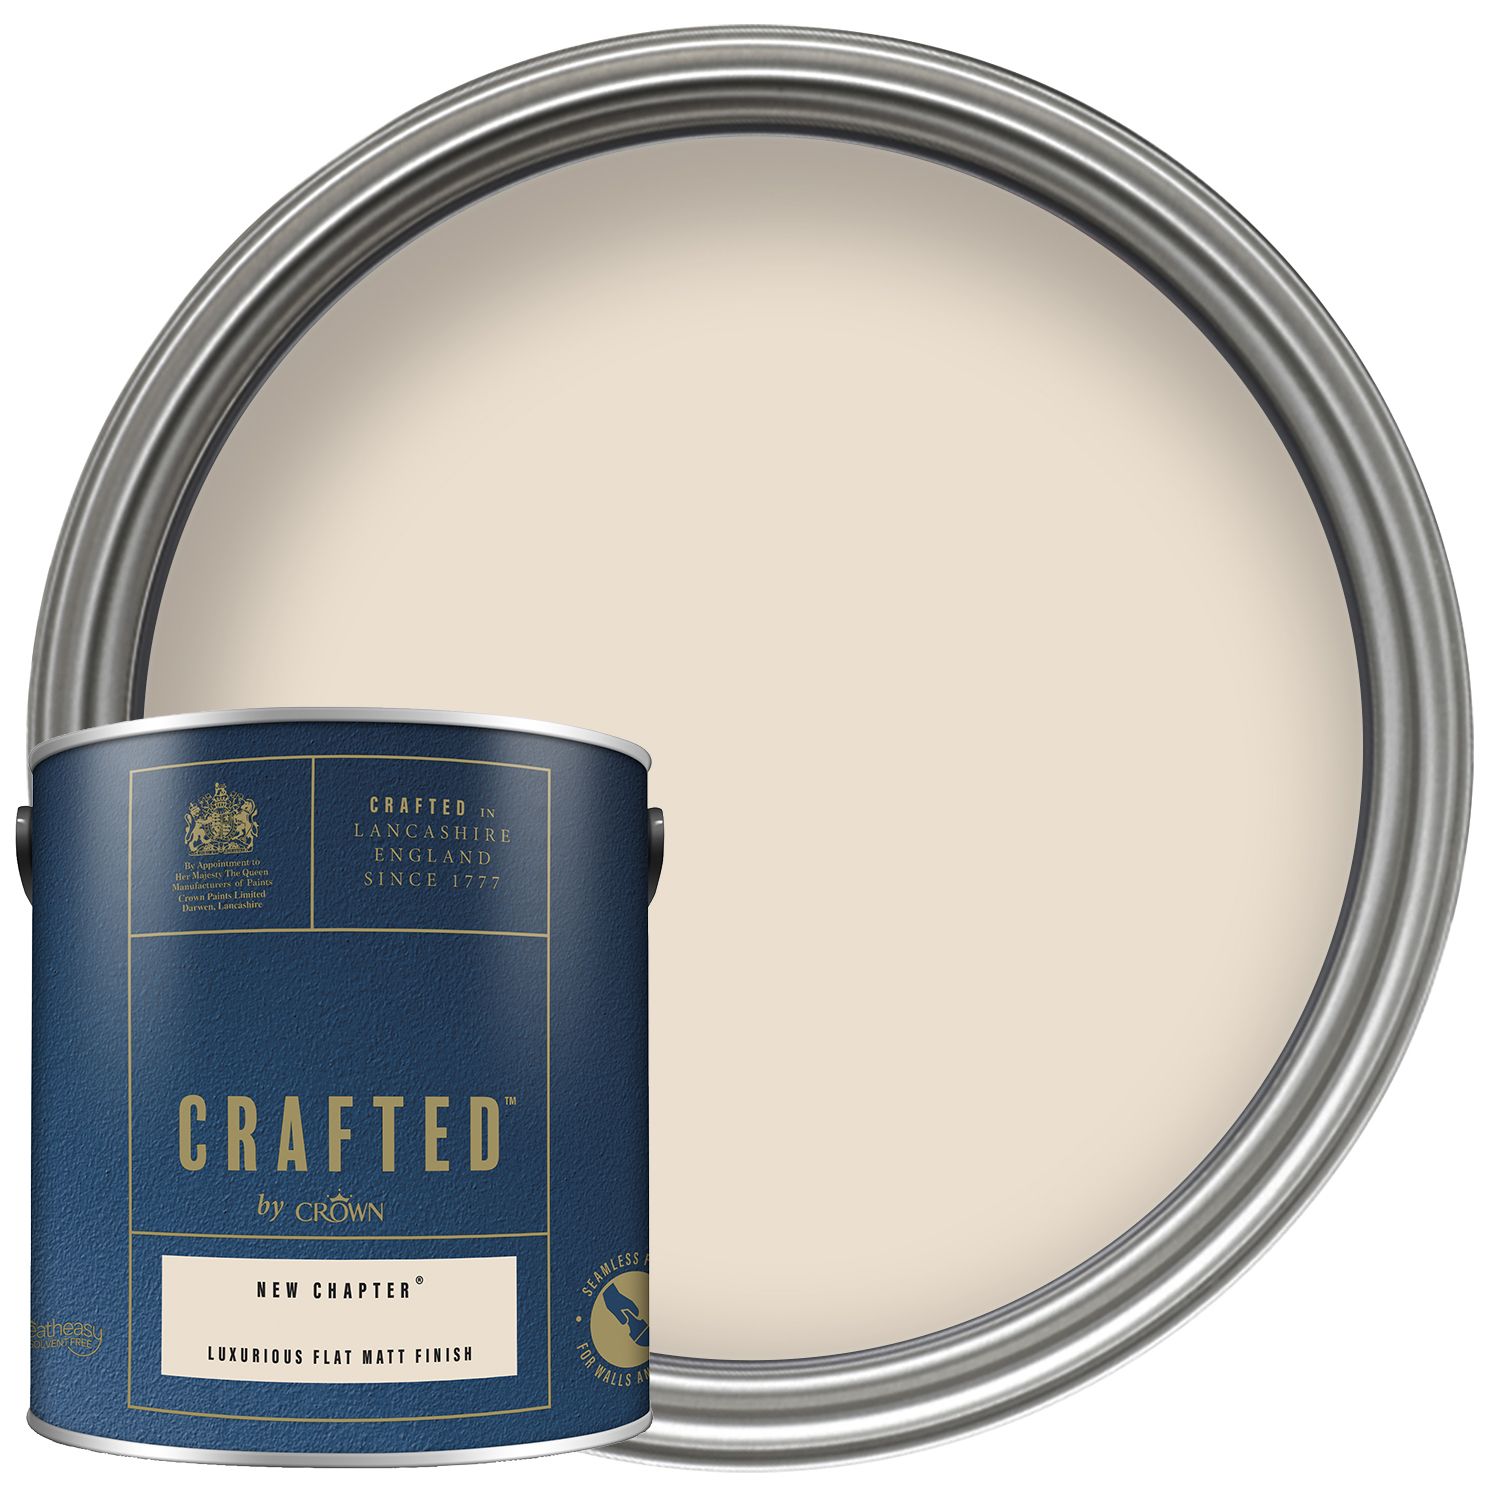 Image of CRAFTED™ by Crown Flat Matt Emulsion Interior Paint - New Chapter™ - 2.5L